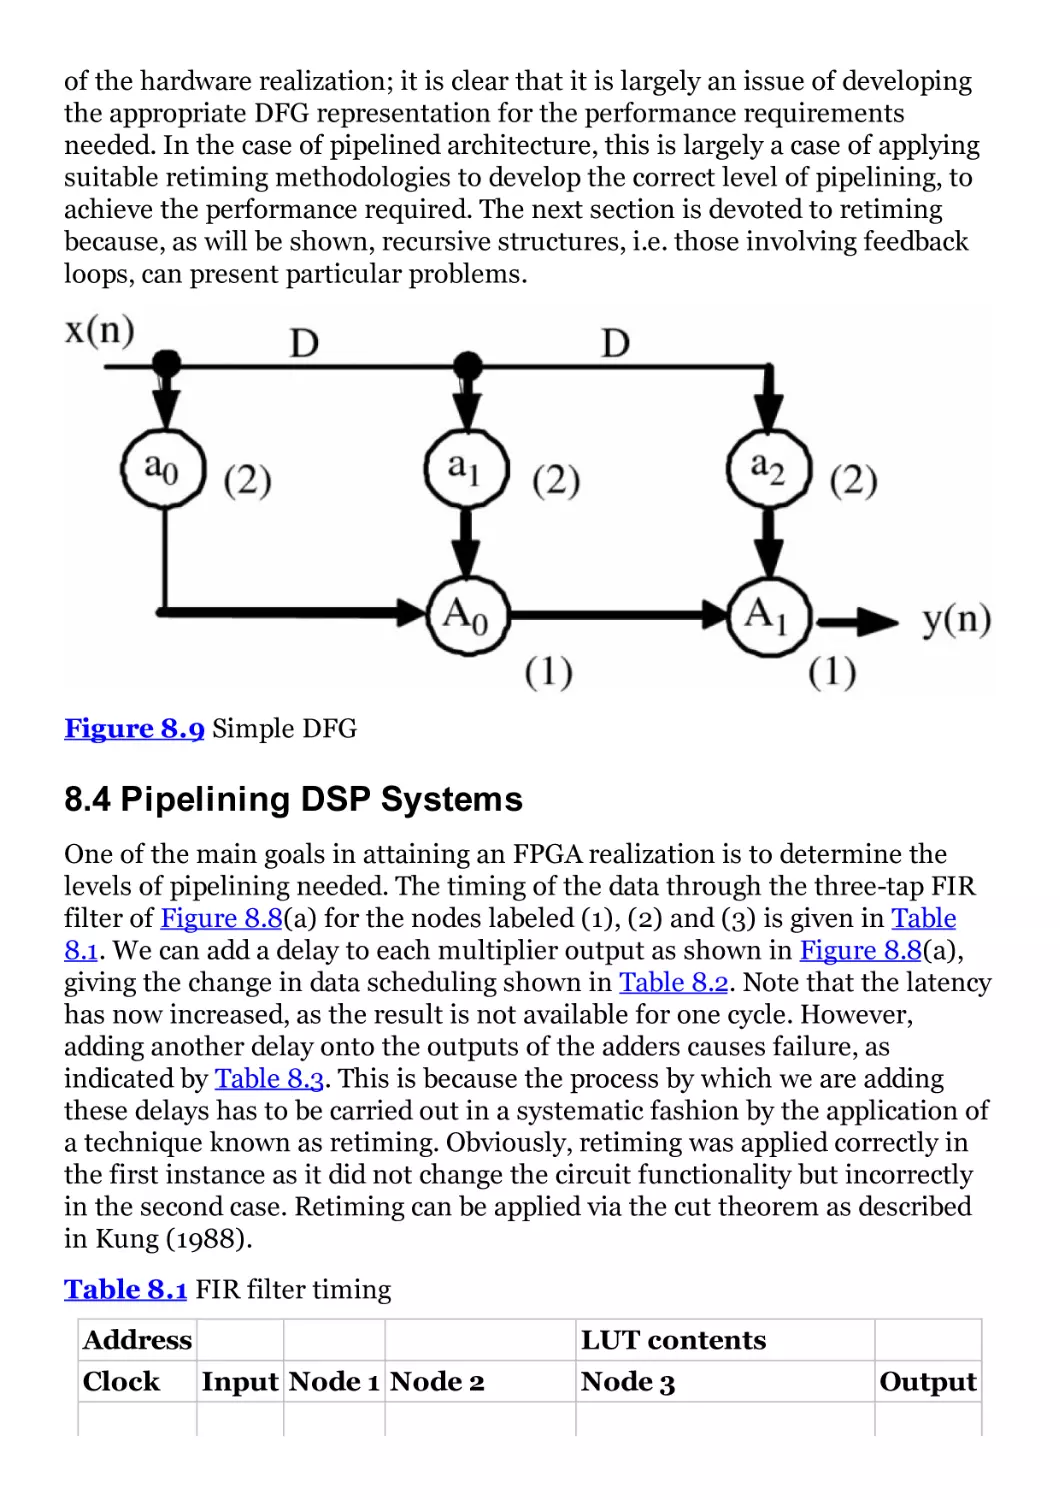 8.4 Pipelining DSP Systems